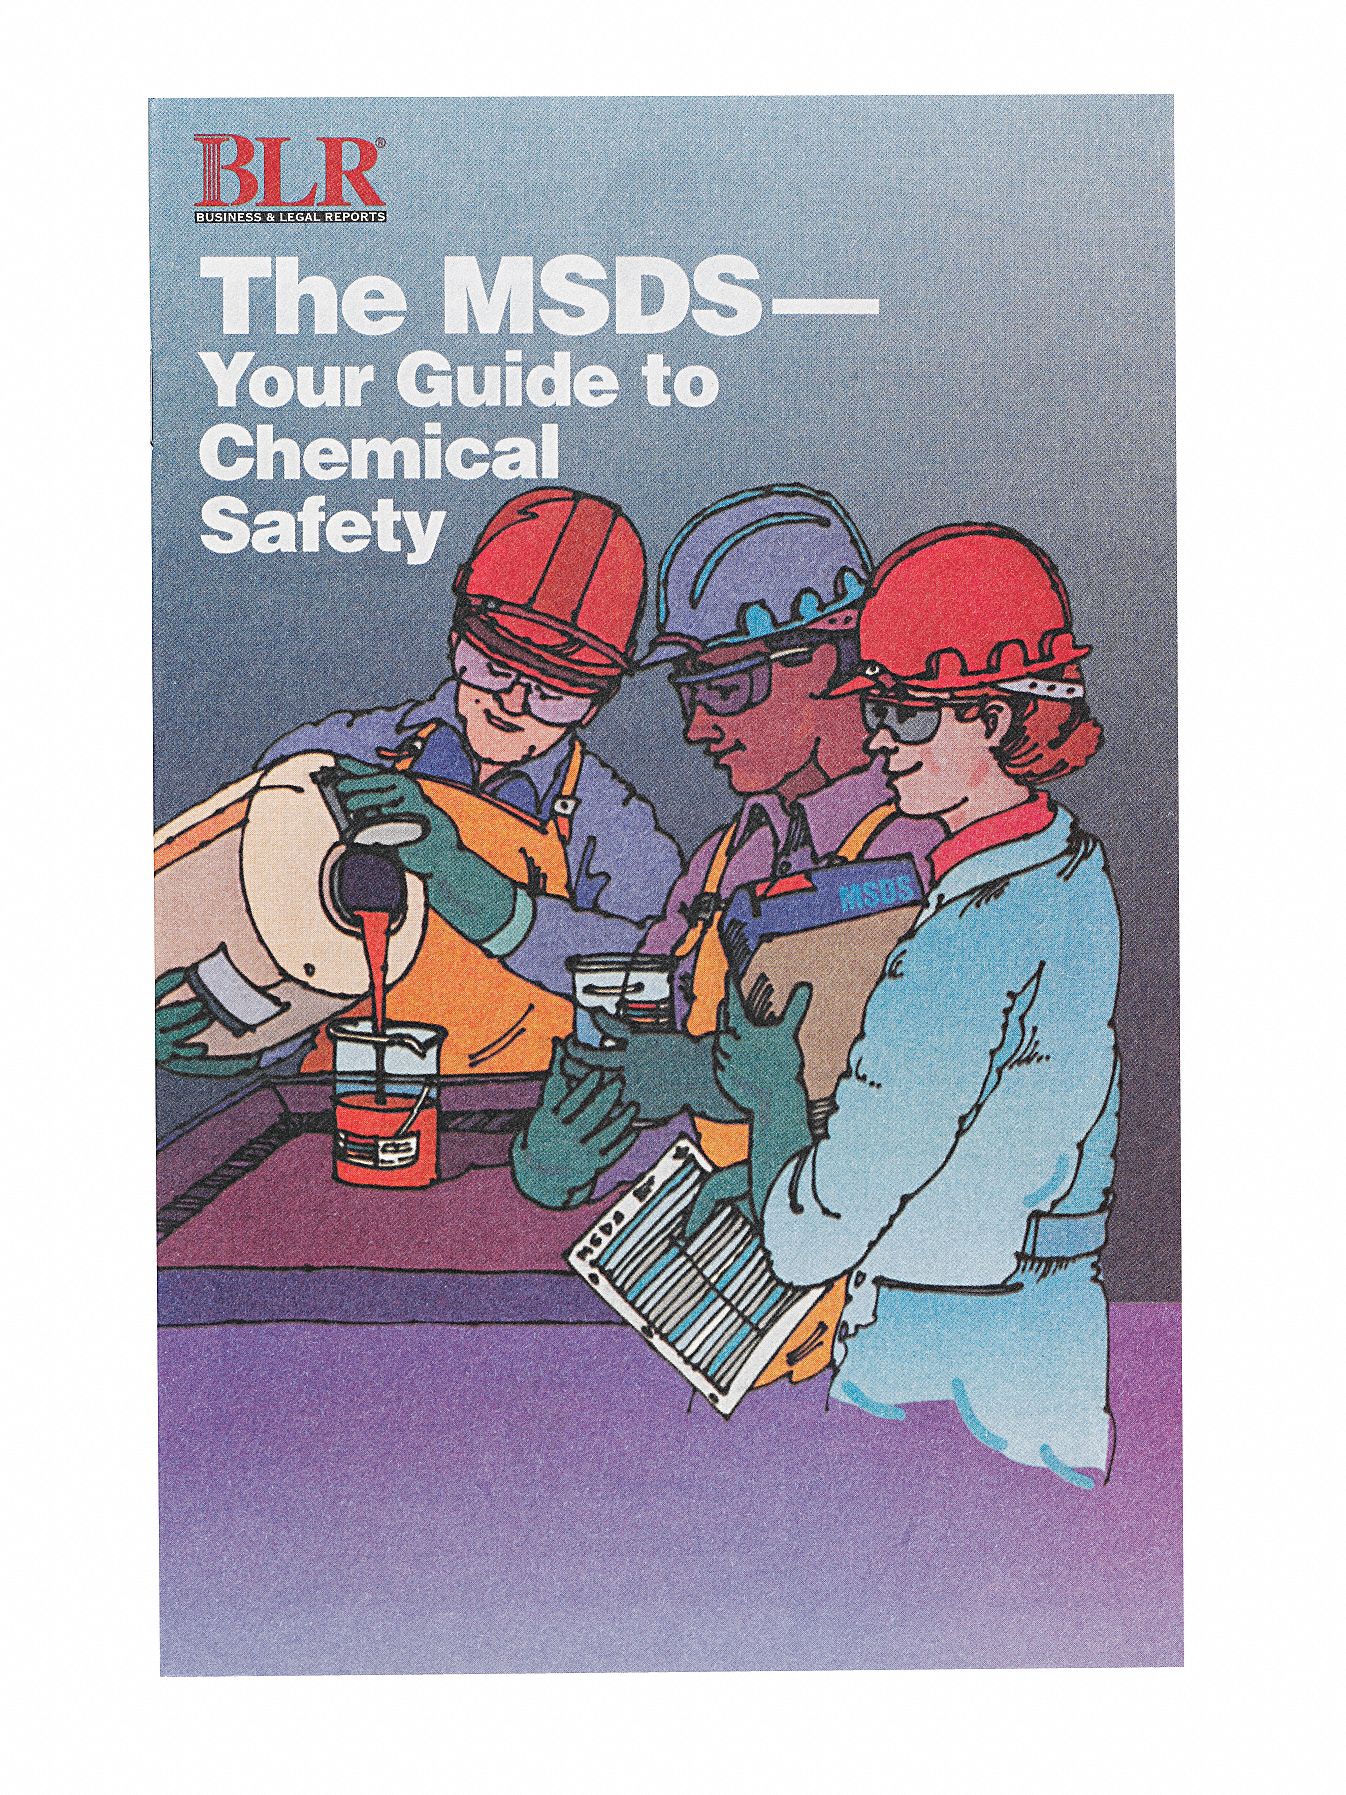 Guide to Chemical Safety: Book/Booklet, Chemical Safety